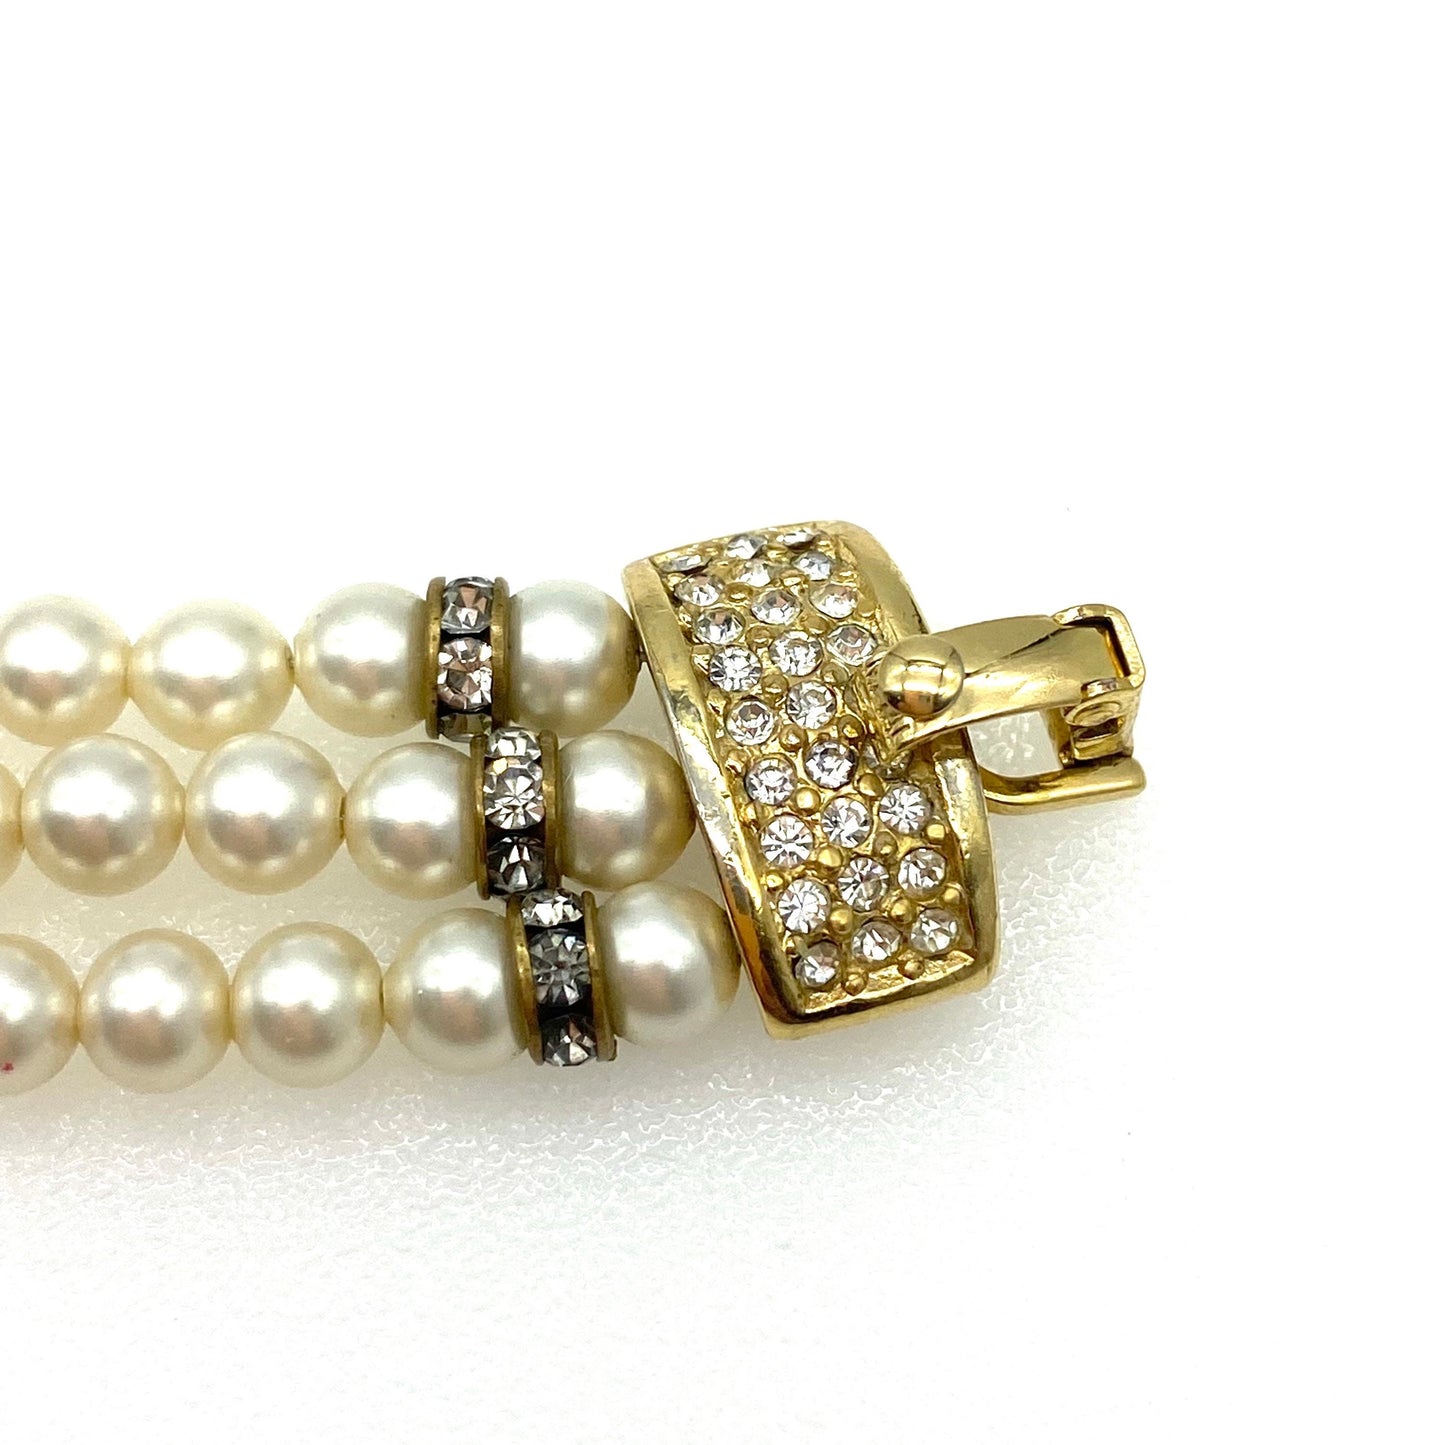 Three Strand Christian Dior Faux Pearl and Crystal Bracelet in a Christian Dior Bijoux Box with Bijoux Tag